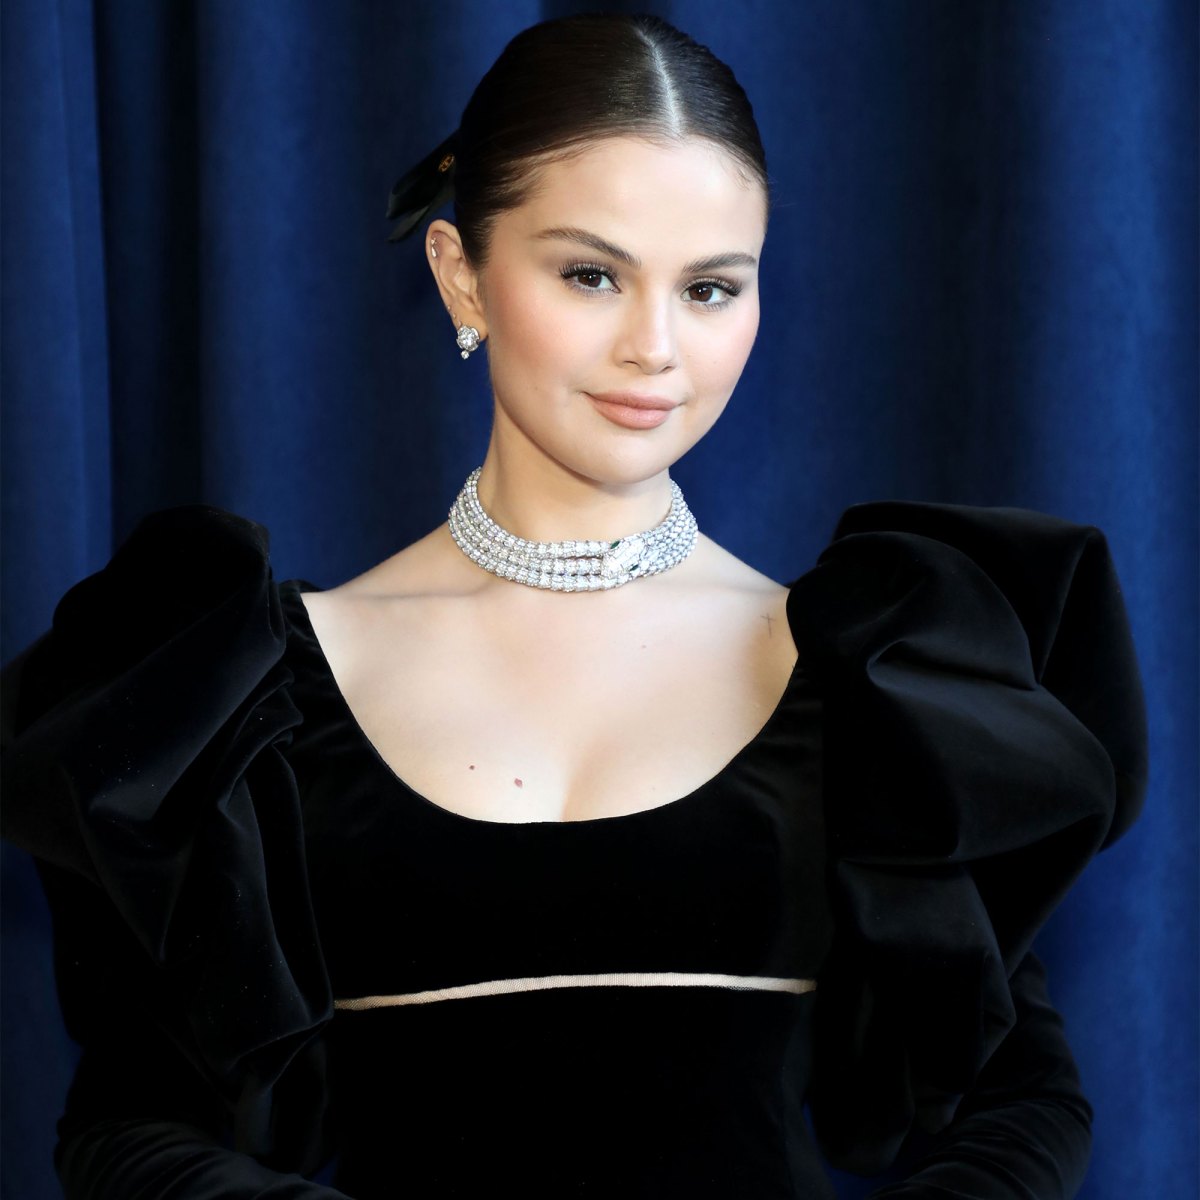 Selena Gomez Says She 'Didn't Feel Good About My Body' at the 2015 Met Gala